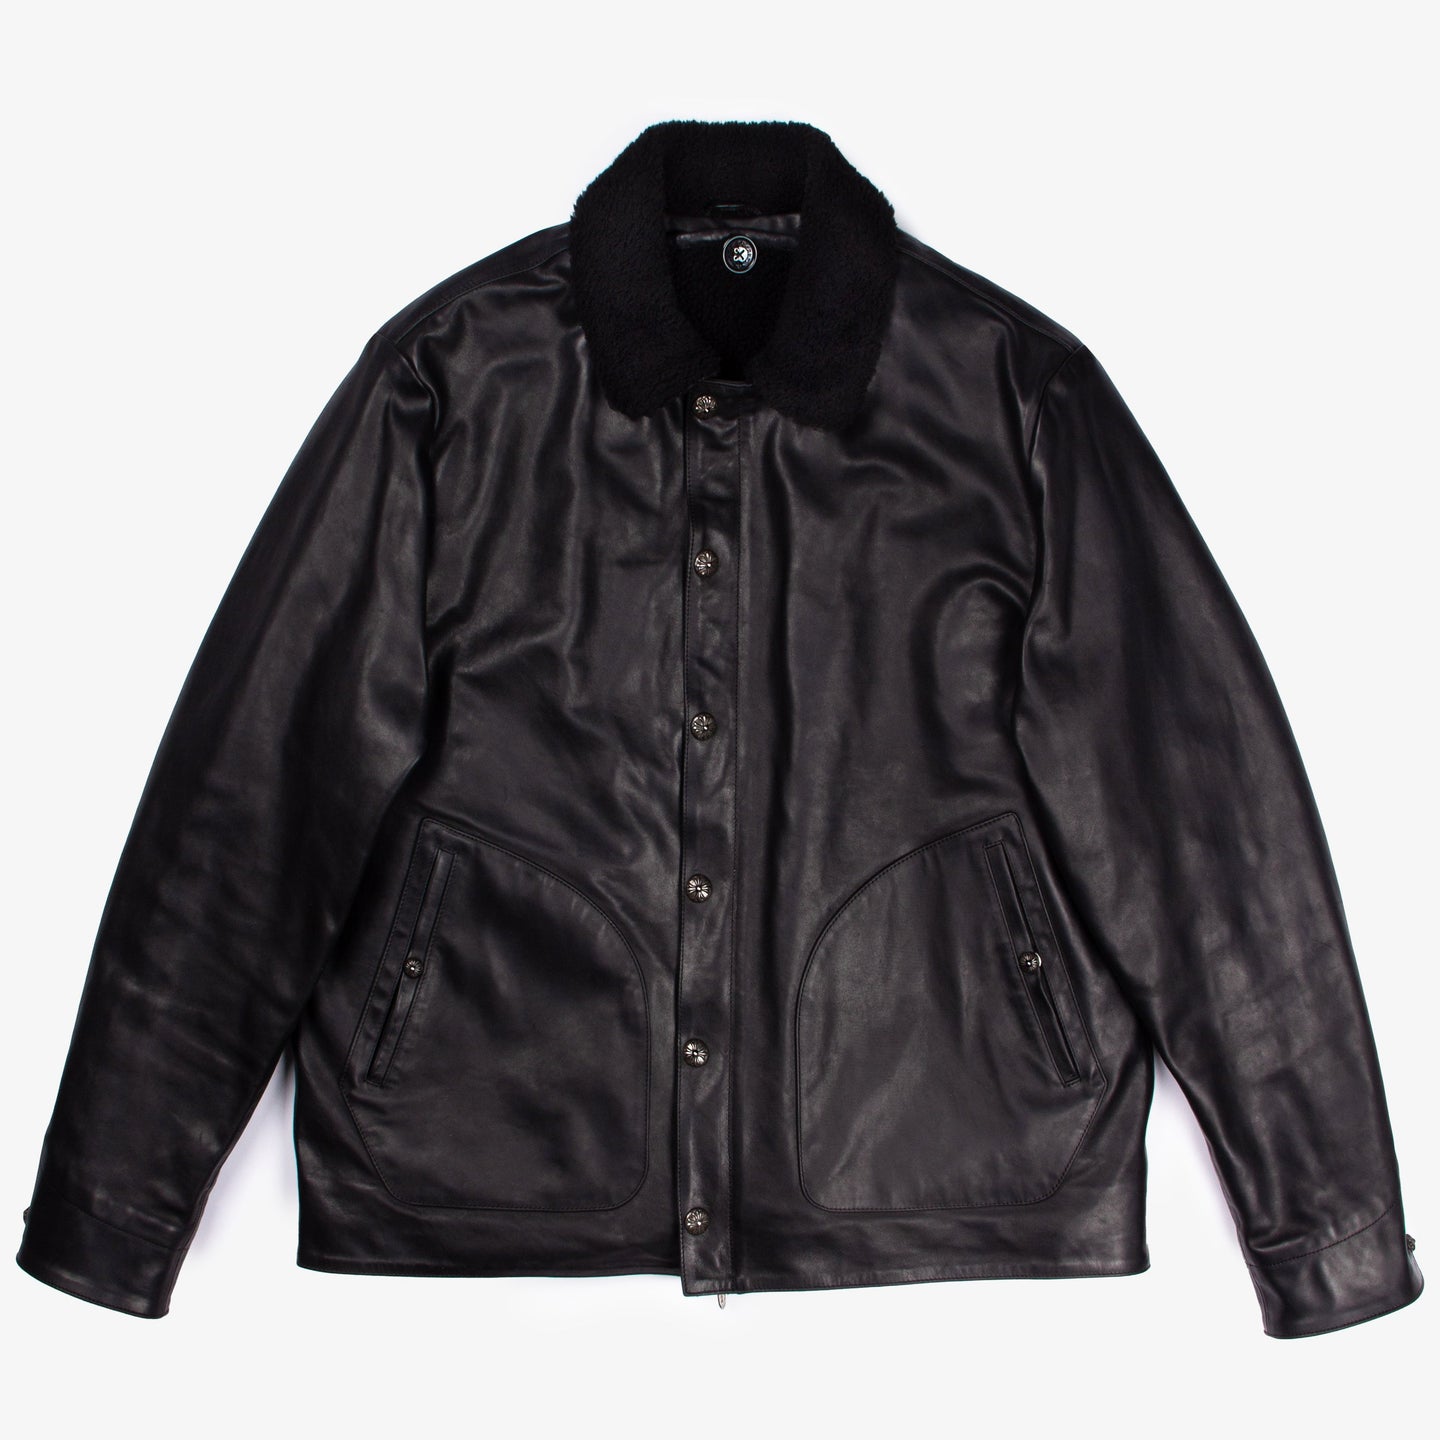 SHEARLING LINED LEATHER JACKET